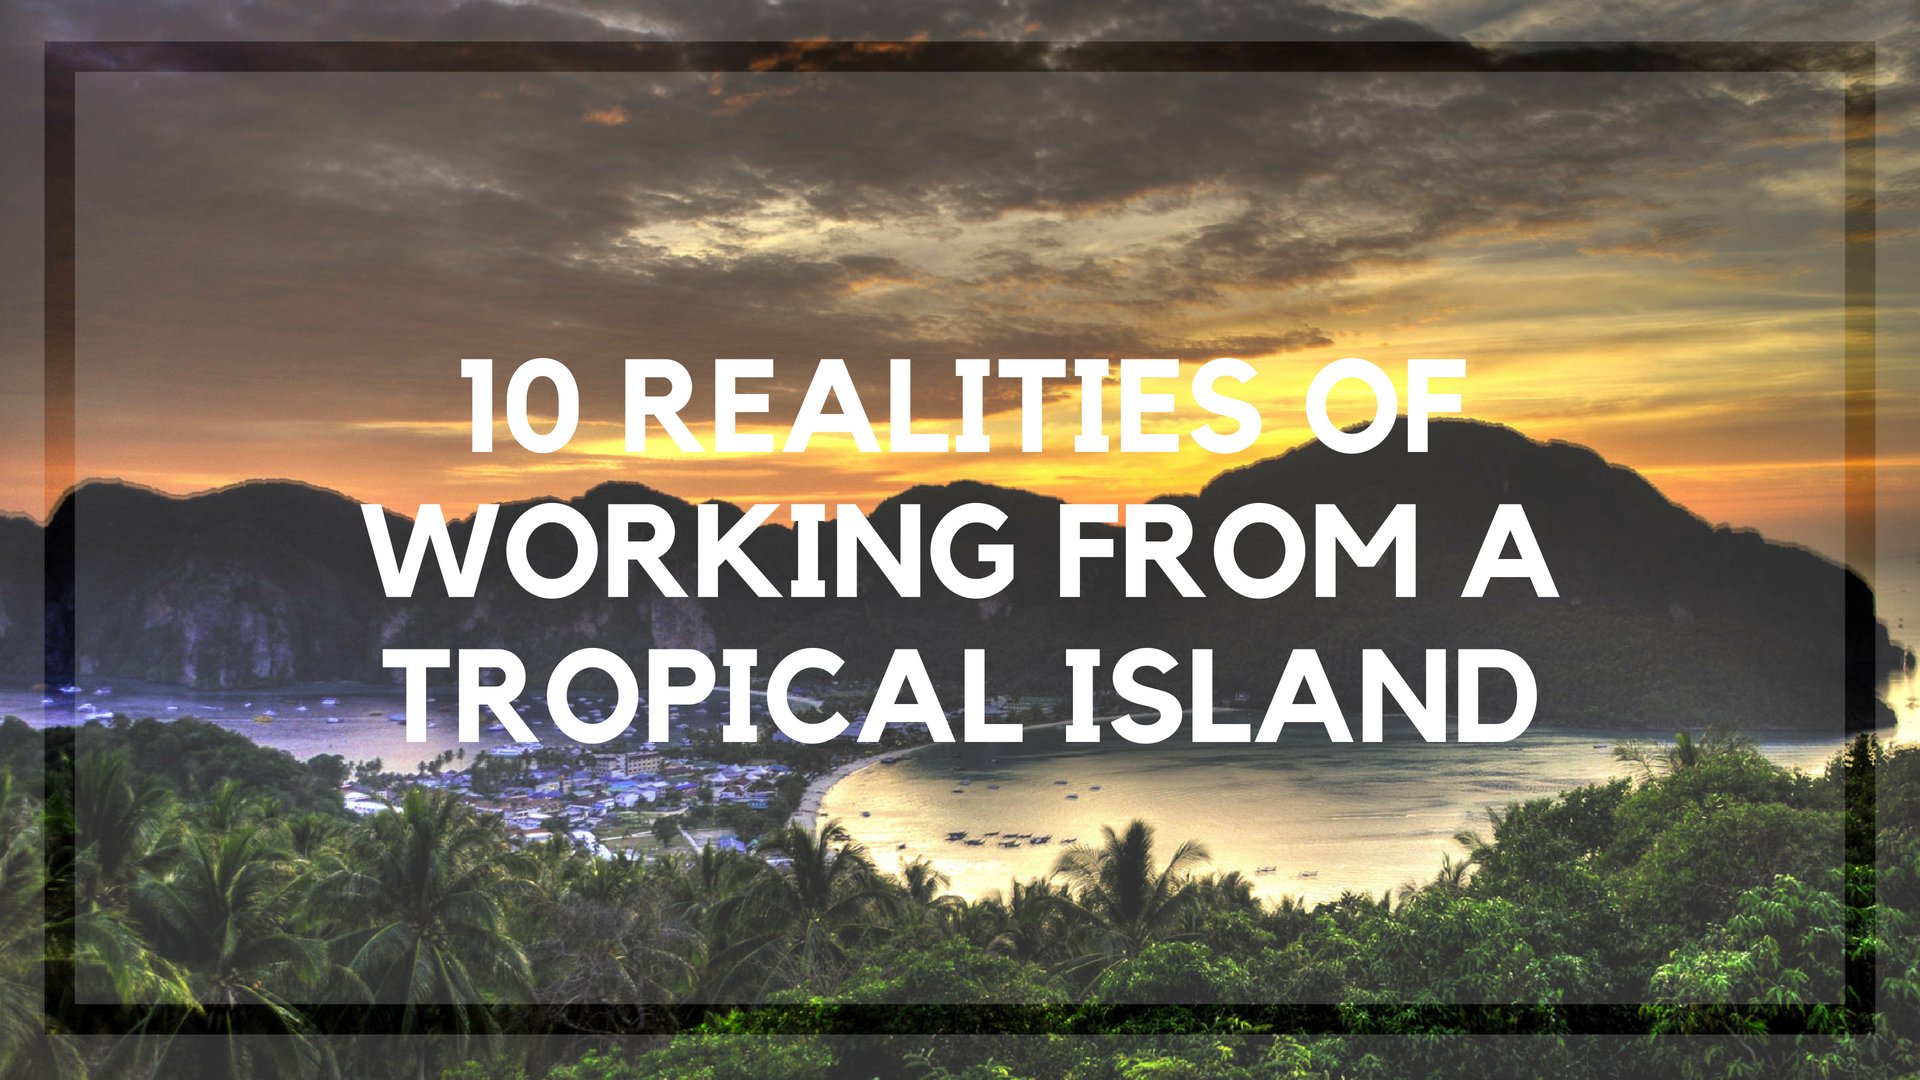 10 Realities of Working From a Tropical Island